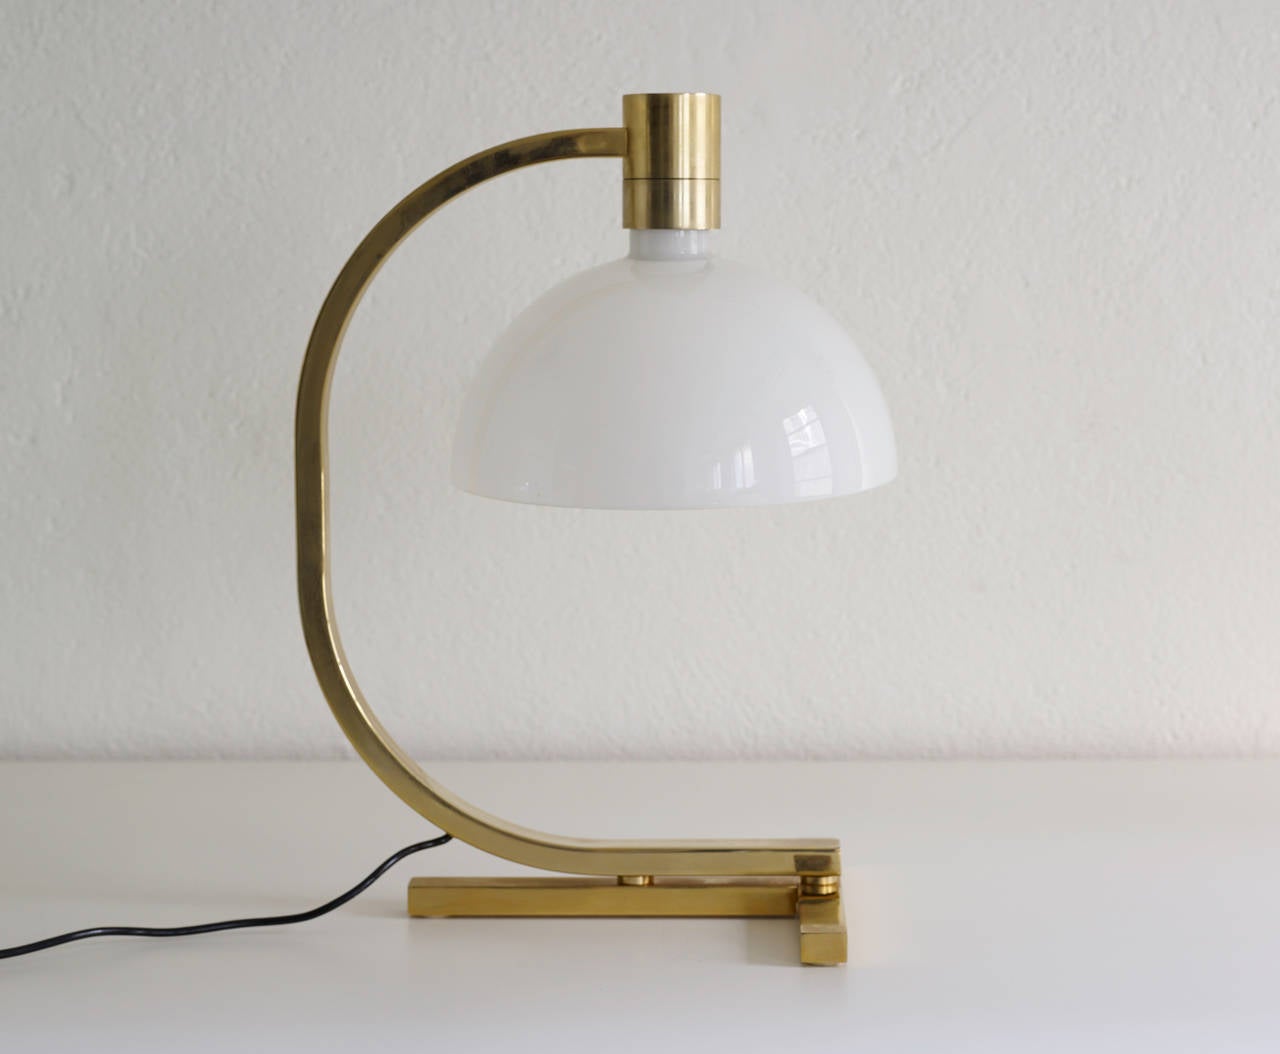 AS1C table or desk lamp designed by italian architects Franco Albini, Franca Helg and Antonio Piva as part of the AM/AS lamps series for the italian company Sirrah in 1969. Rarely seen version in gold plated steel structure and white opaline glass.